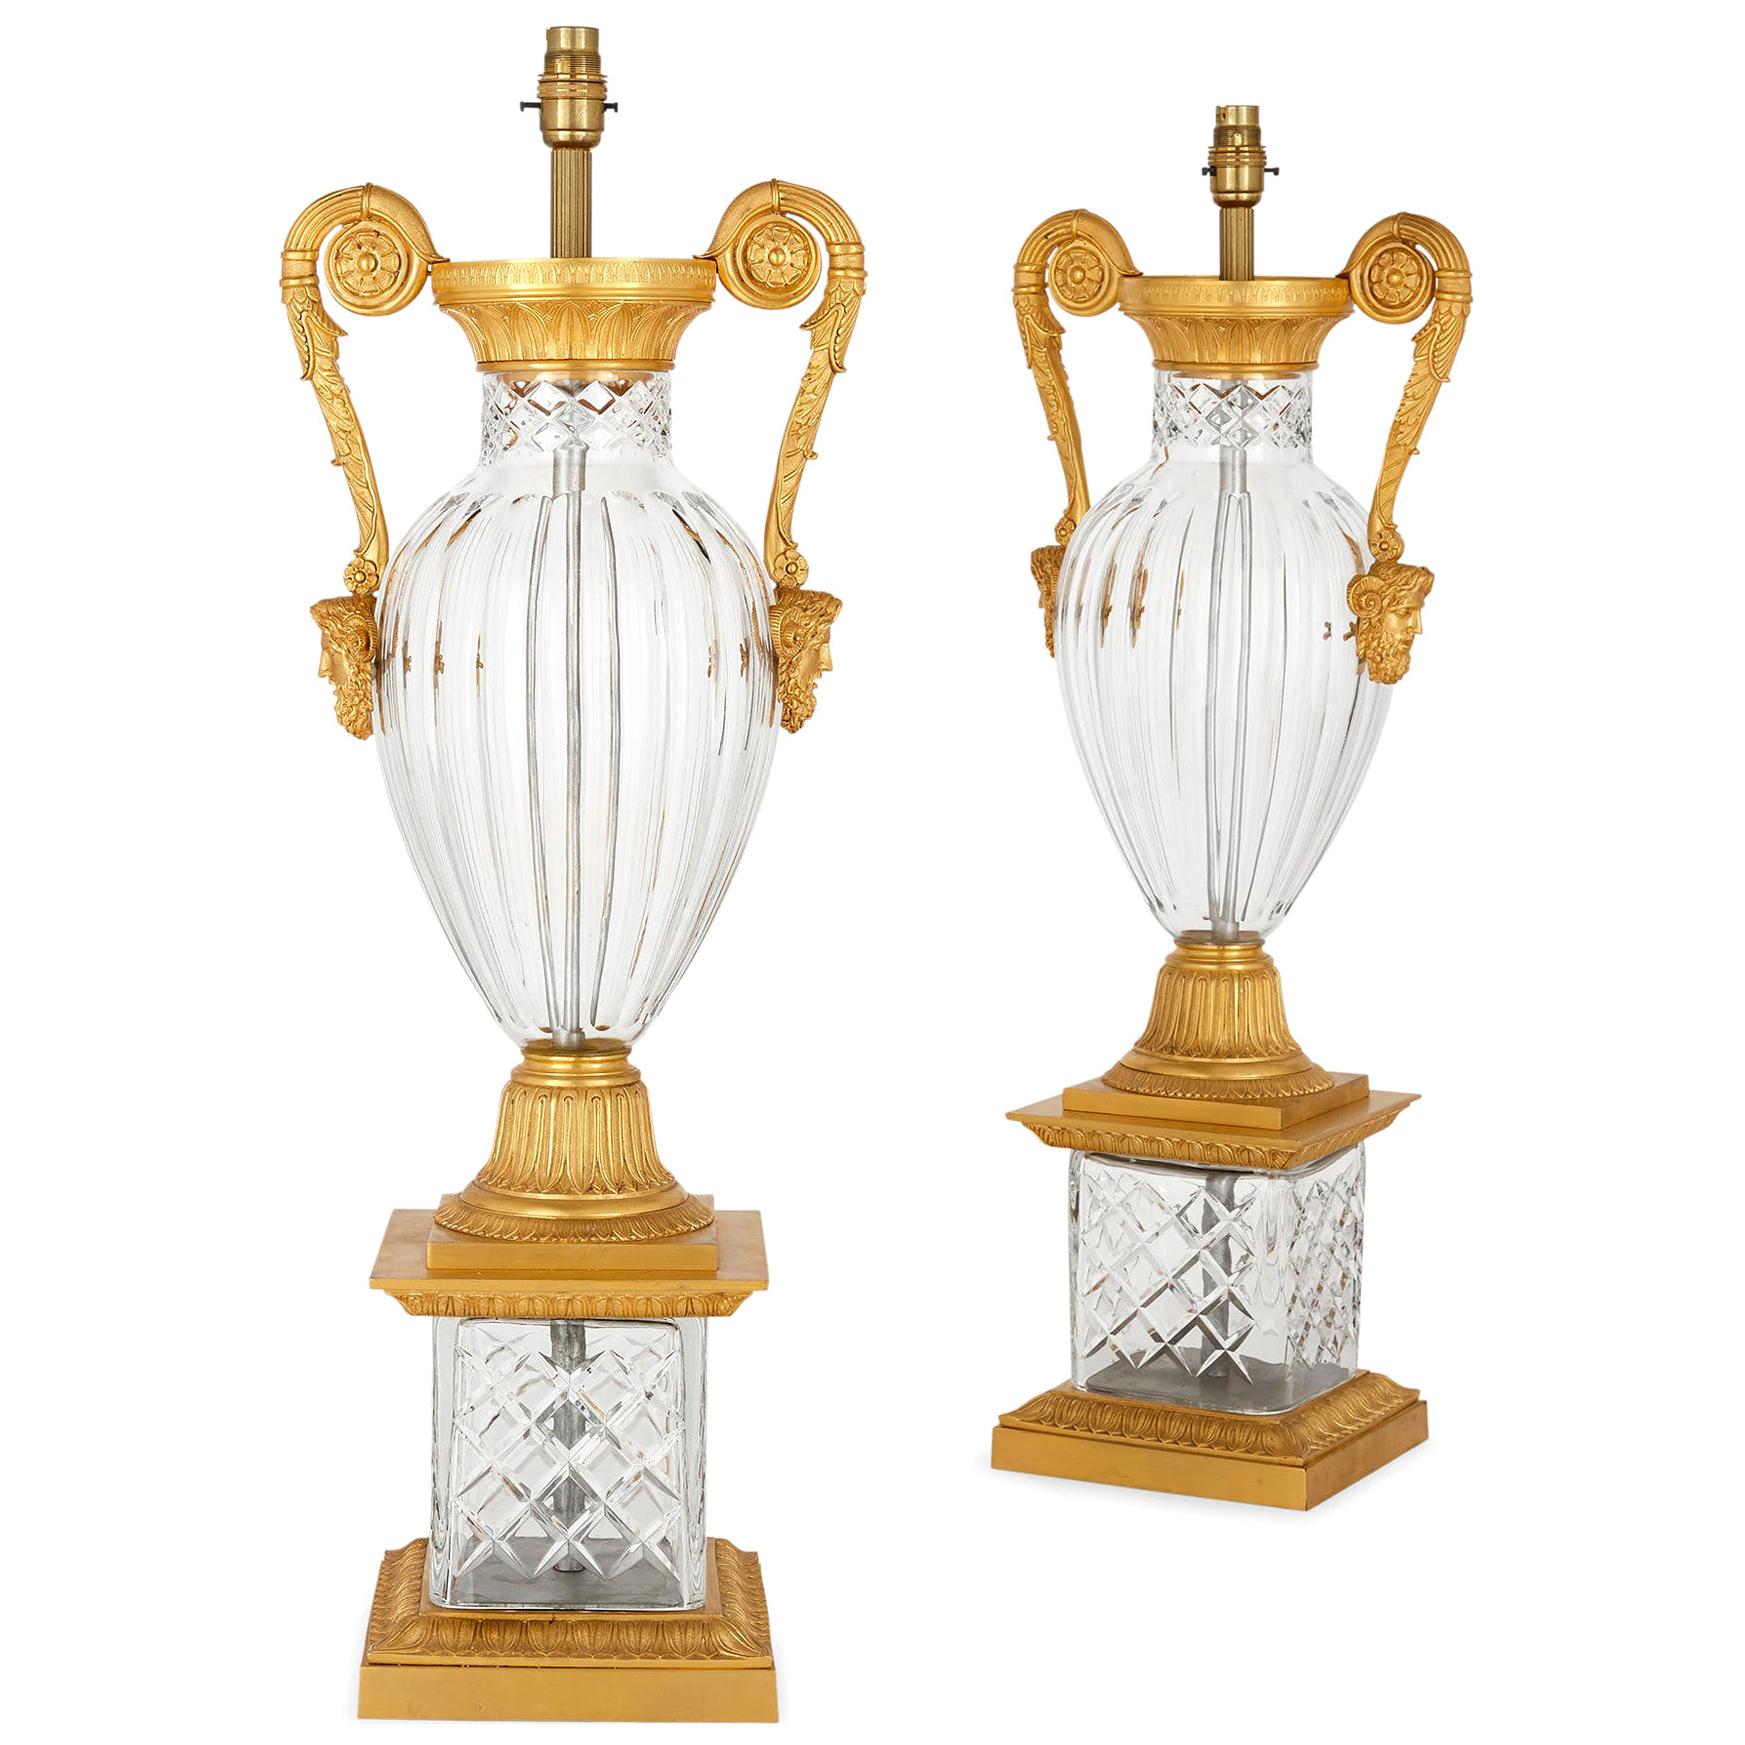 Pair of French Neoclassical Style Gilt Bronze and Cut Glass Lamps